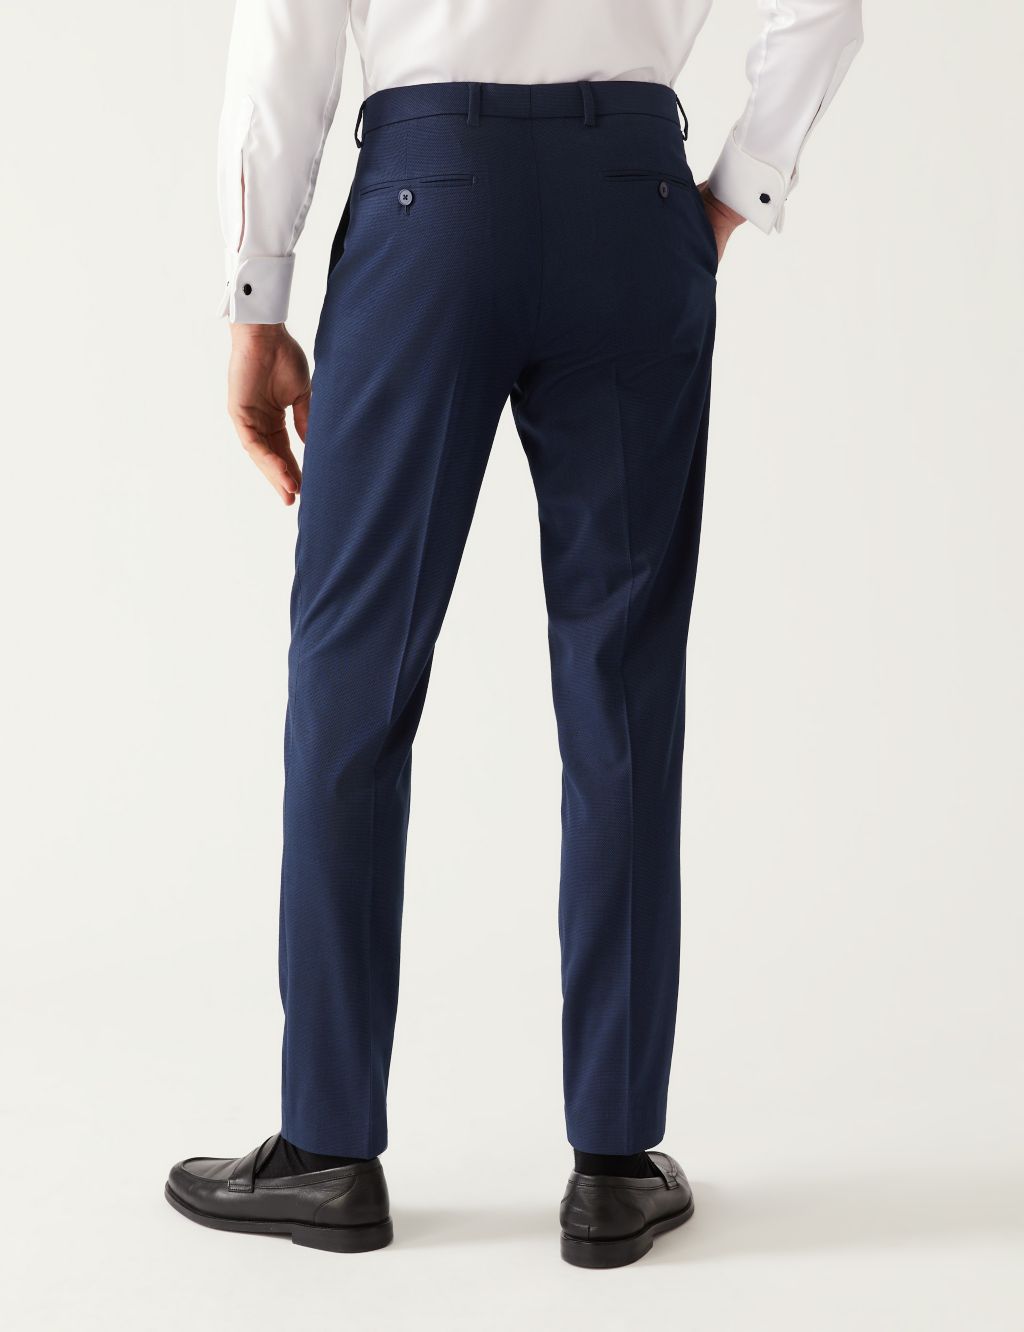 Navy Slim Fit Stretch Suit Trousers image 4